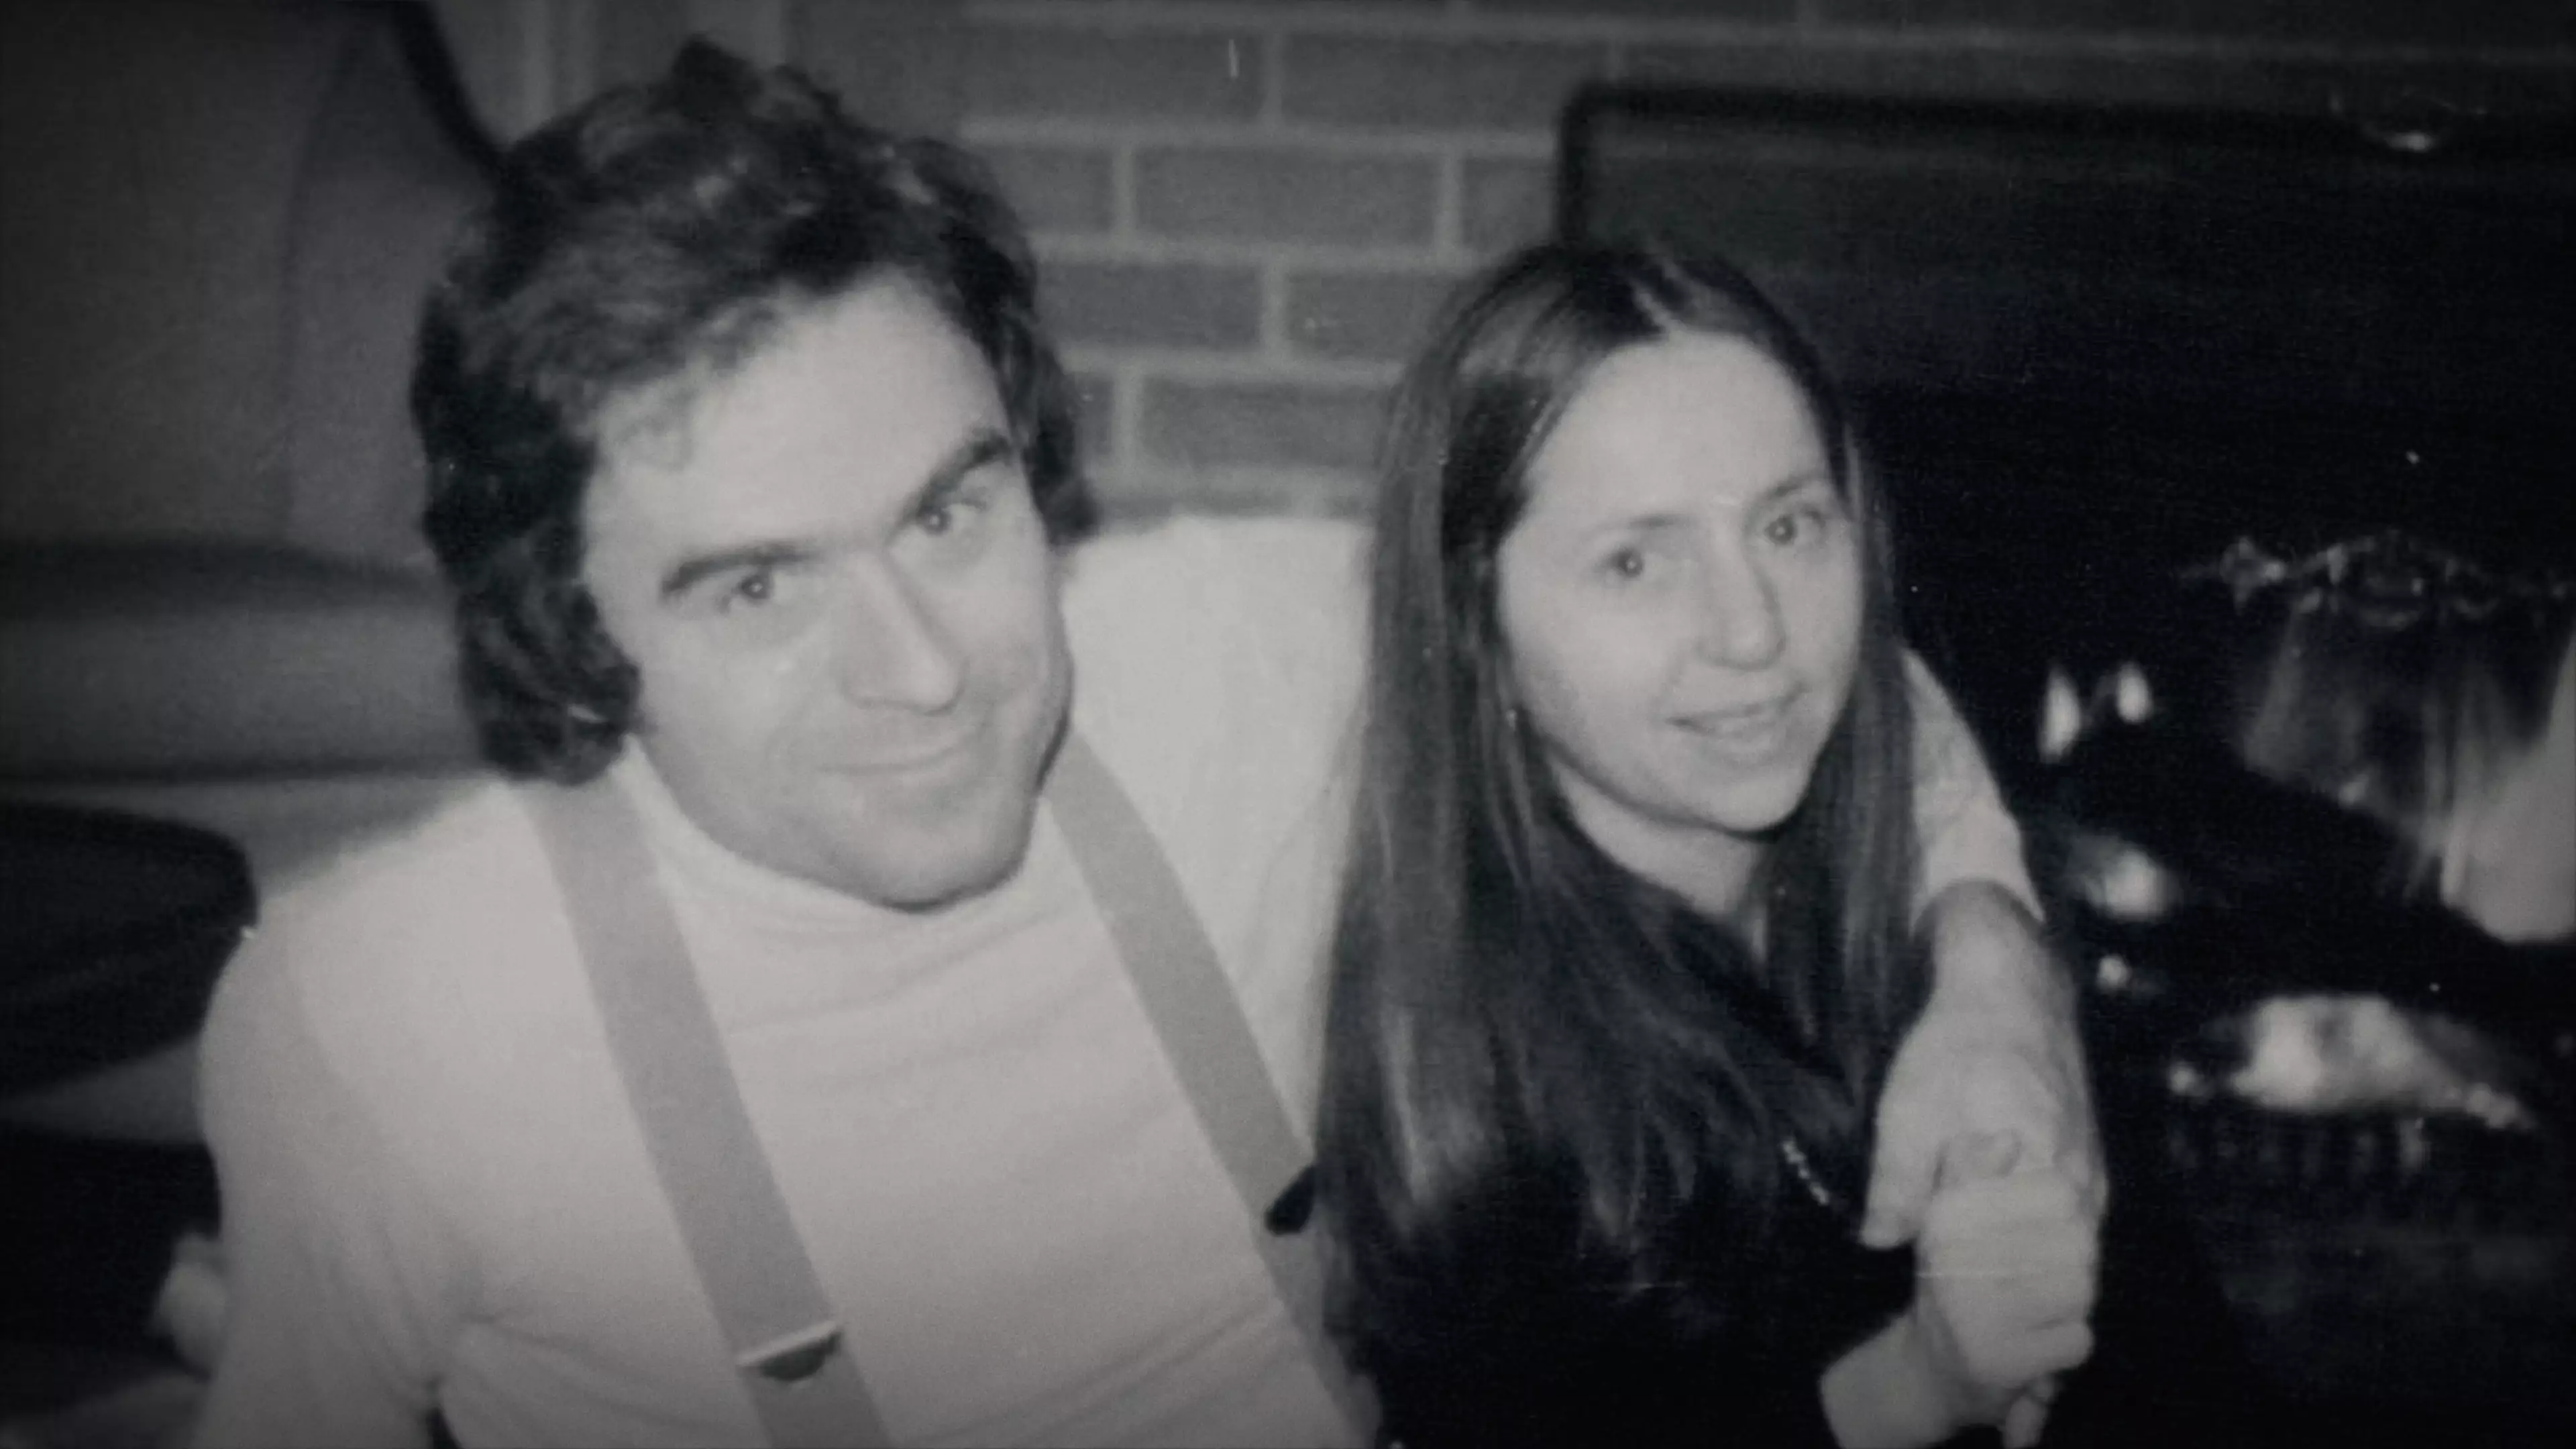 Joe Berlinger will direct the series, who also directed the Ted Bundy docu-series and film on Netflix (